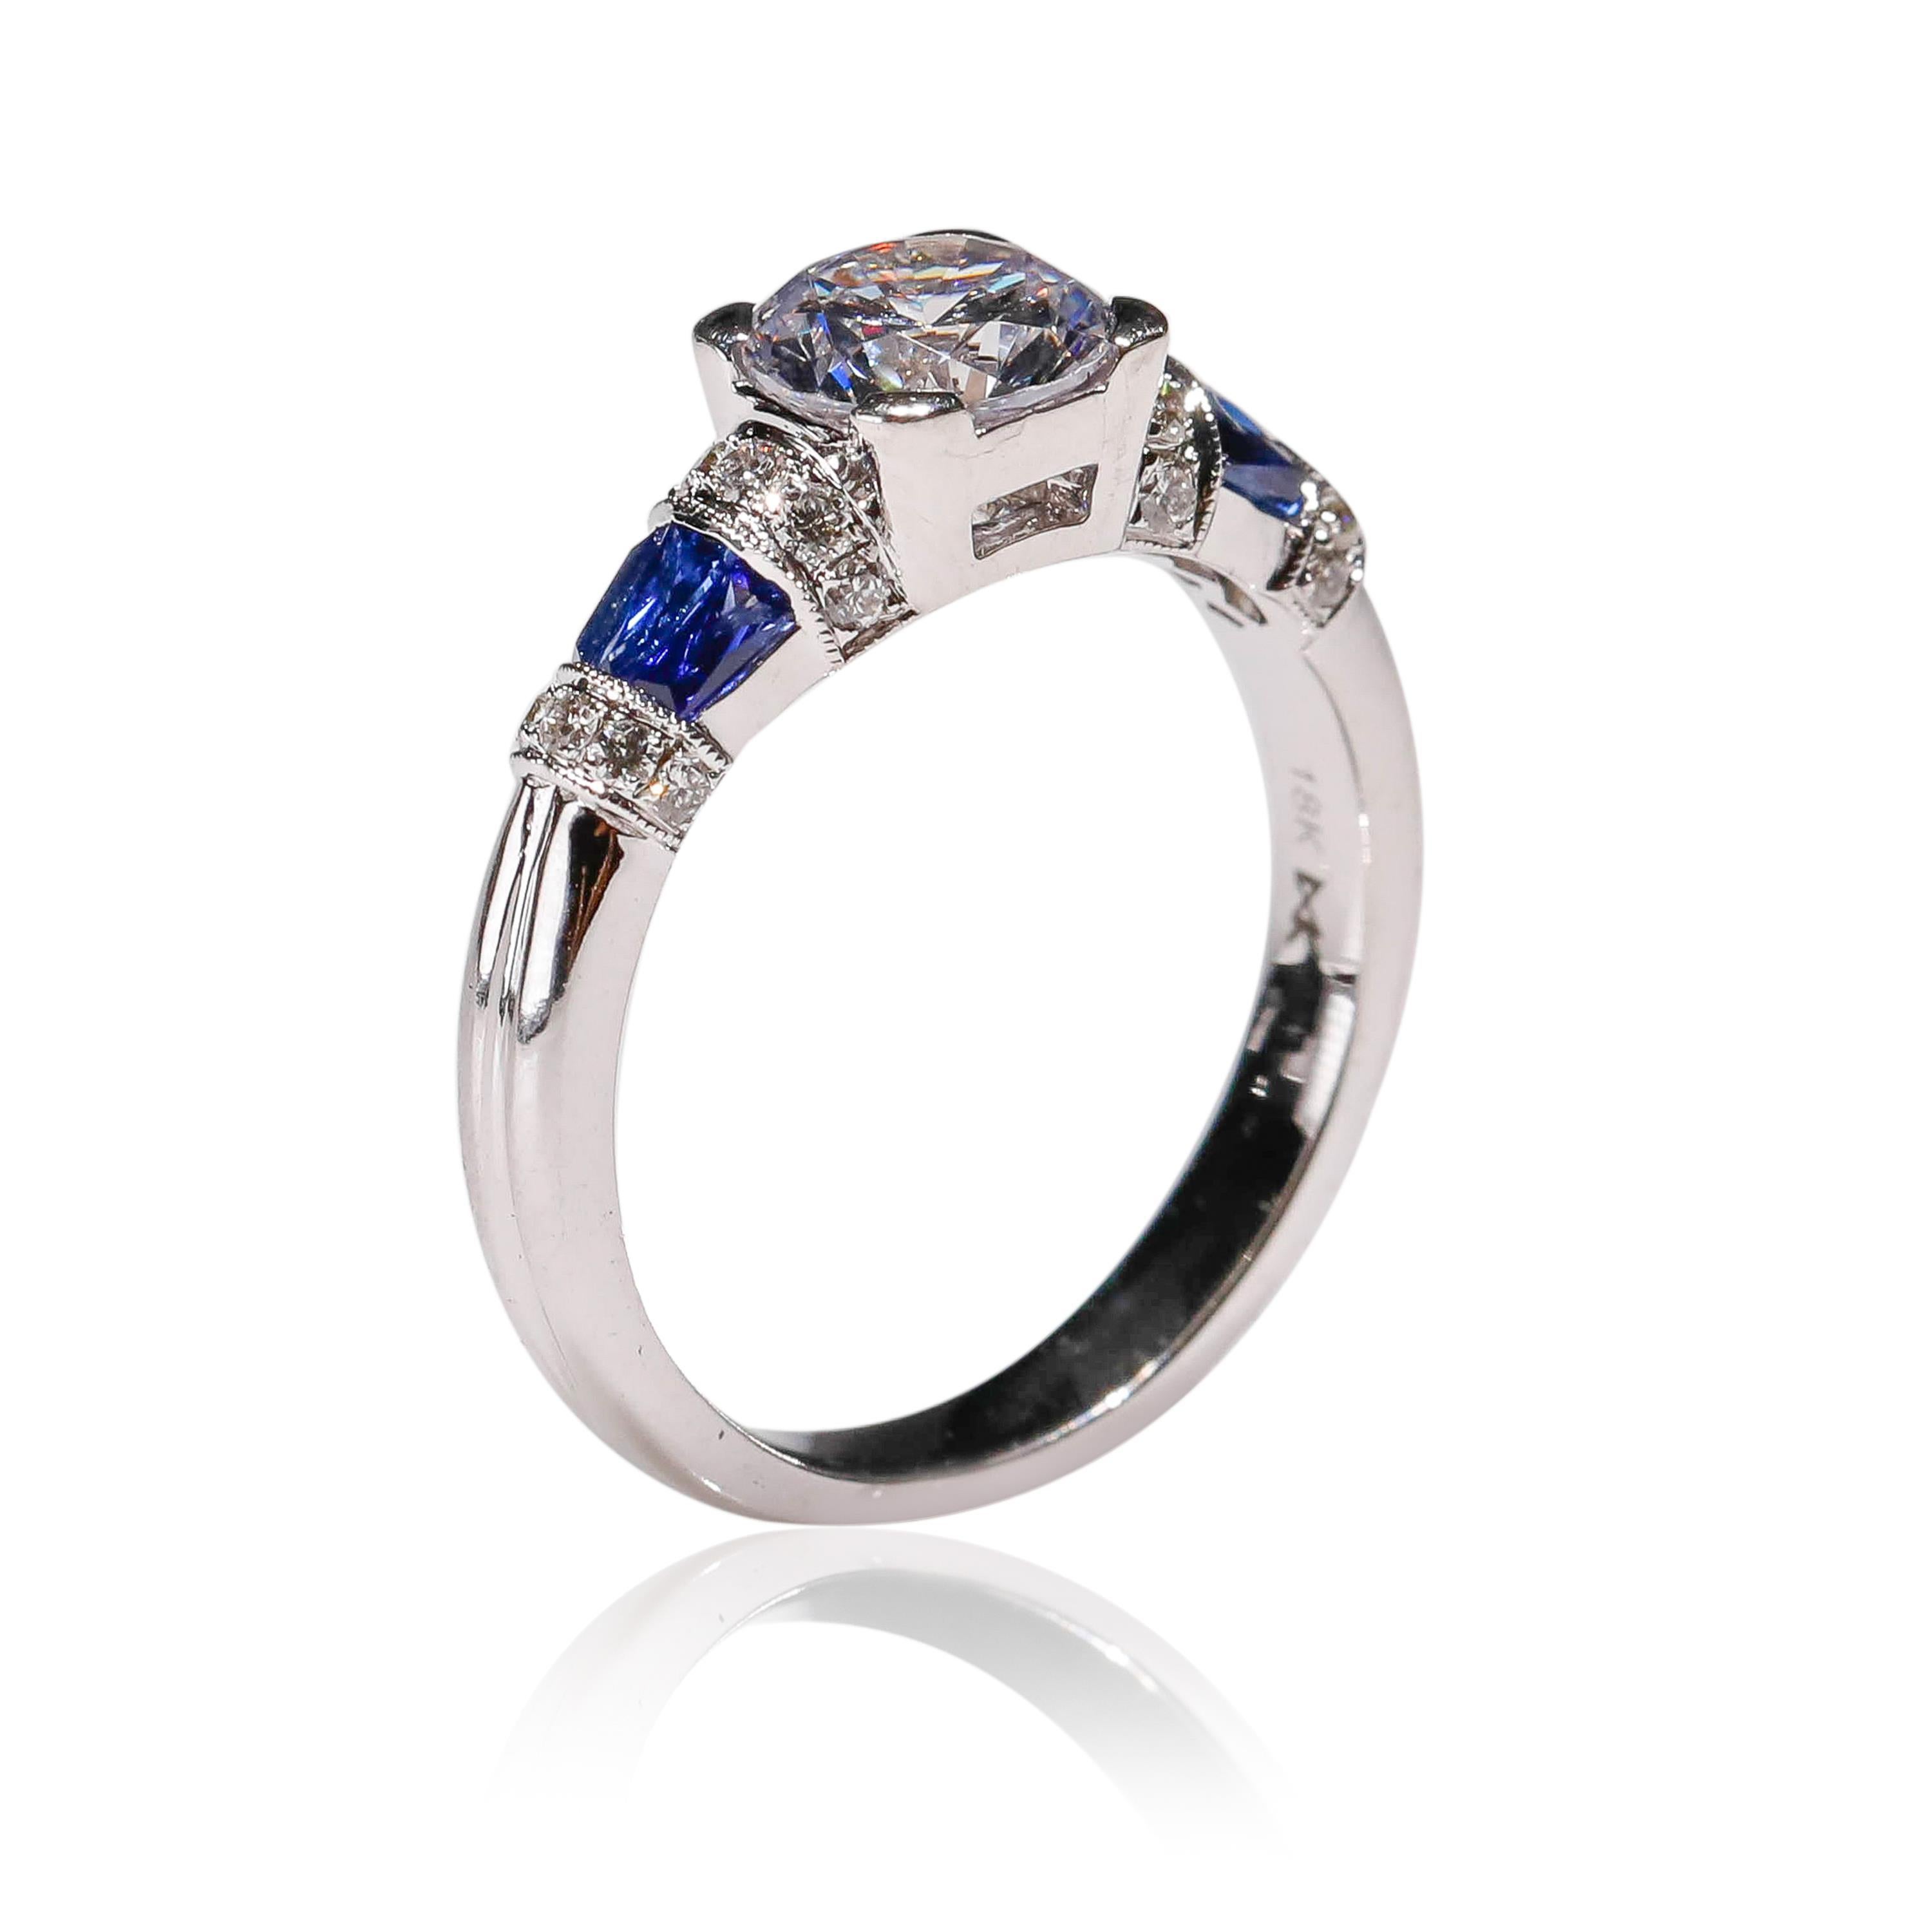 Blue Sapphire 0.2 Carat Round Cut Cubic Zirconia 18K White Gold Solitaire Ring

Crafted in 18kt White Gold, this Unique design showcases a Blue Sapphire 0.35 TCW, set in a halo of round-cut mesmerizing cubic zirconia and diamonds, Polished to a